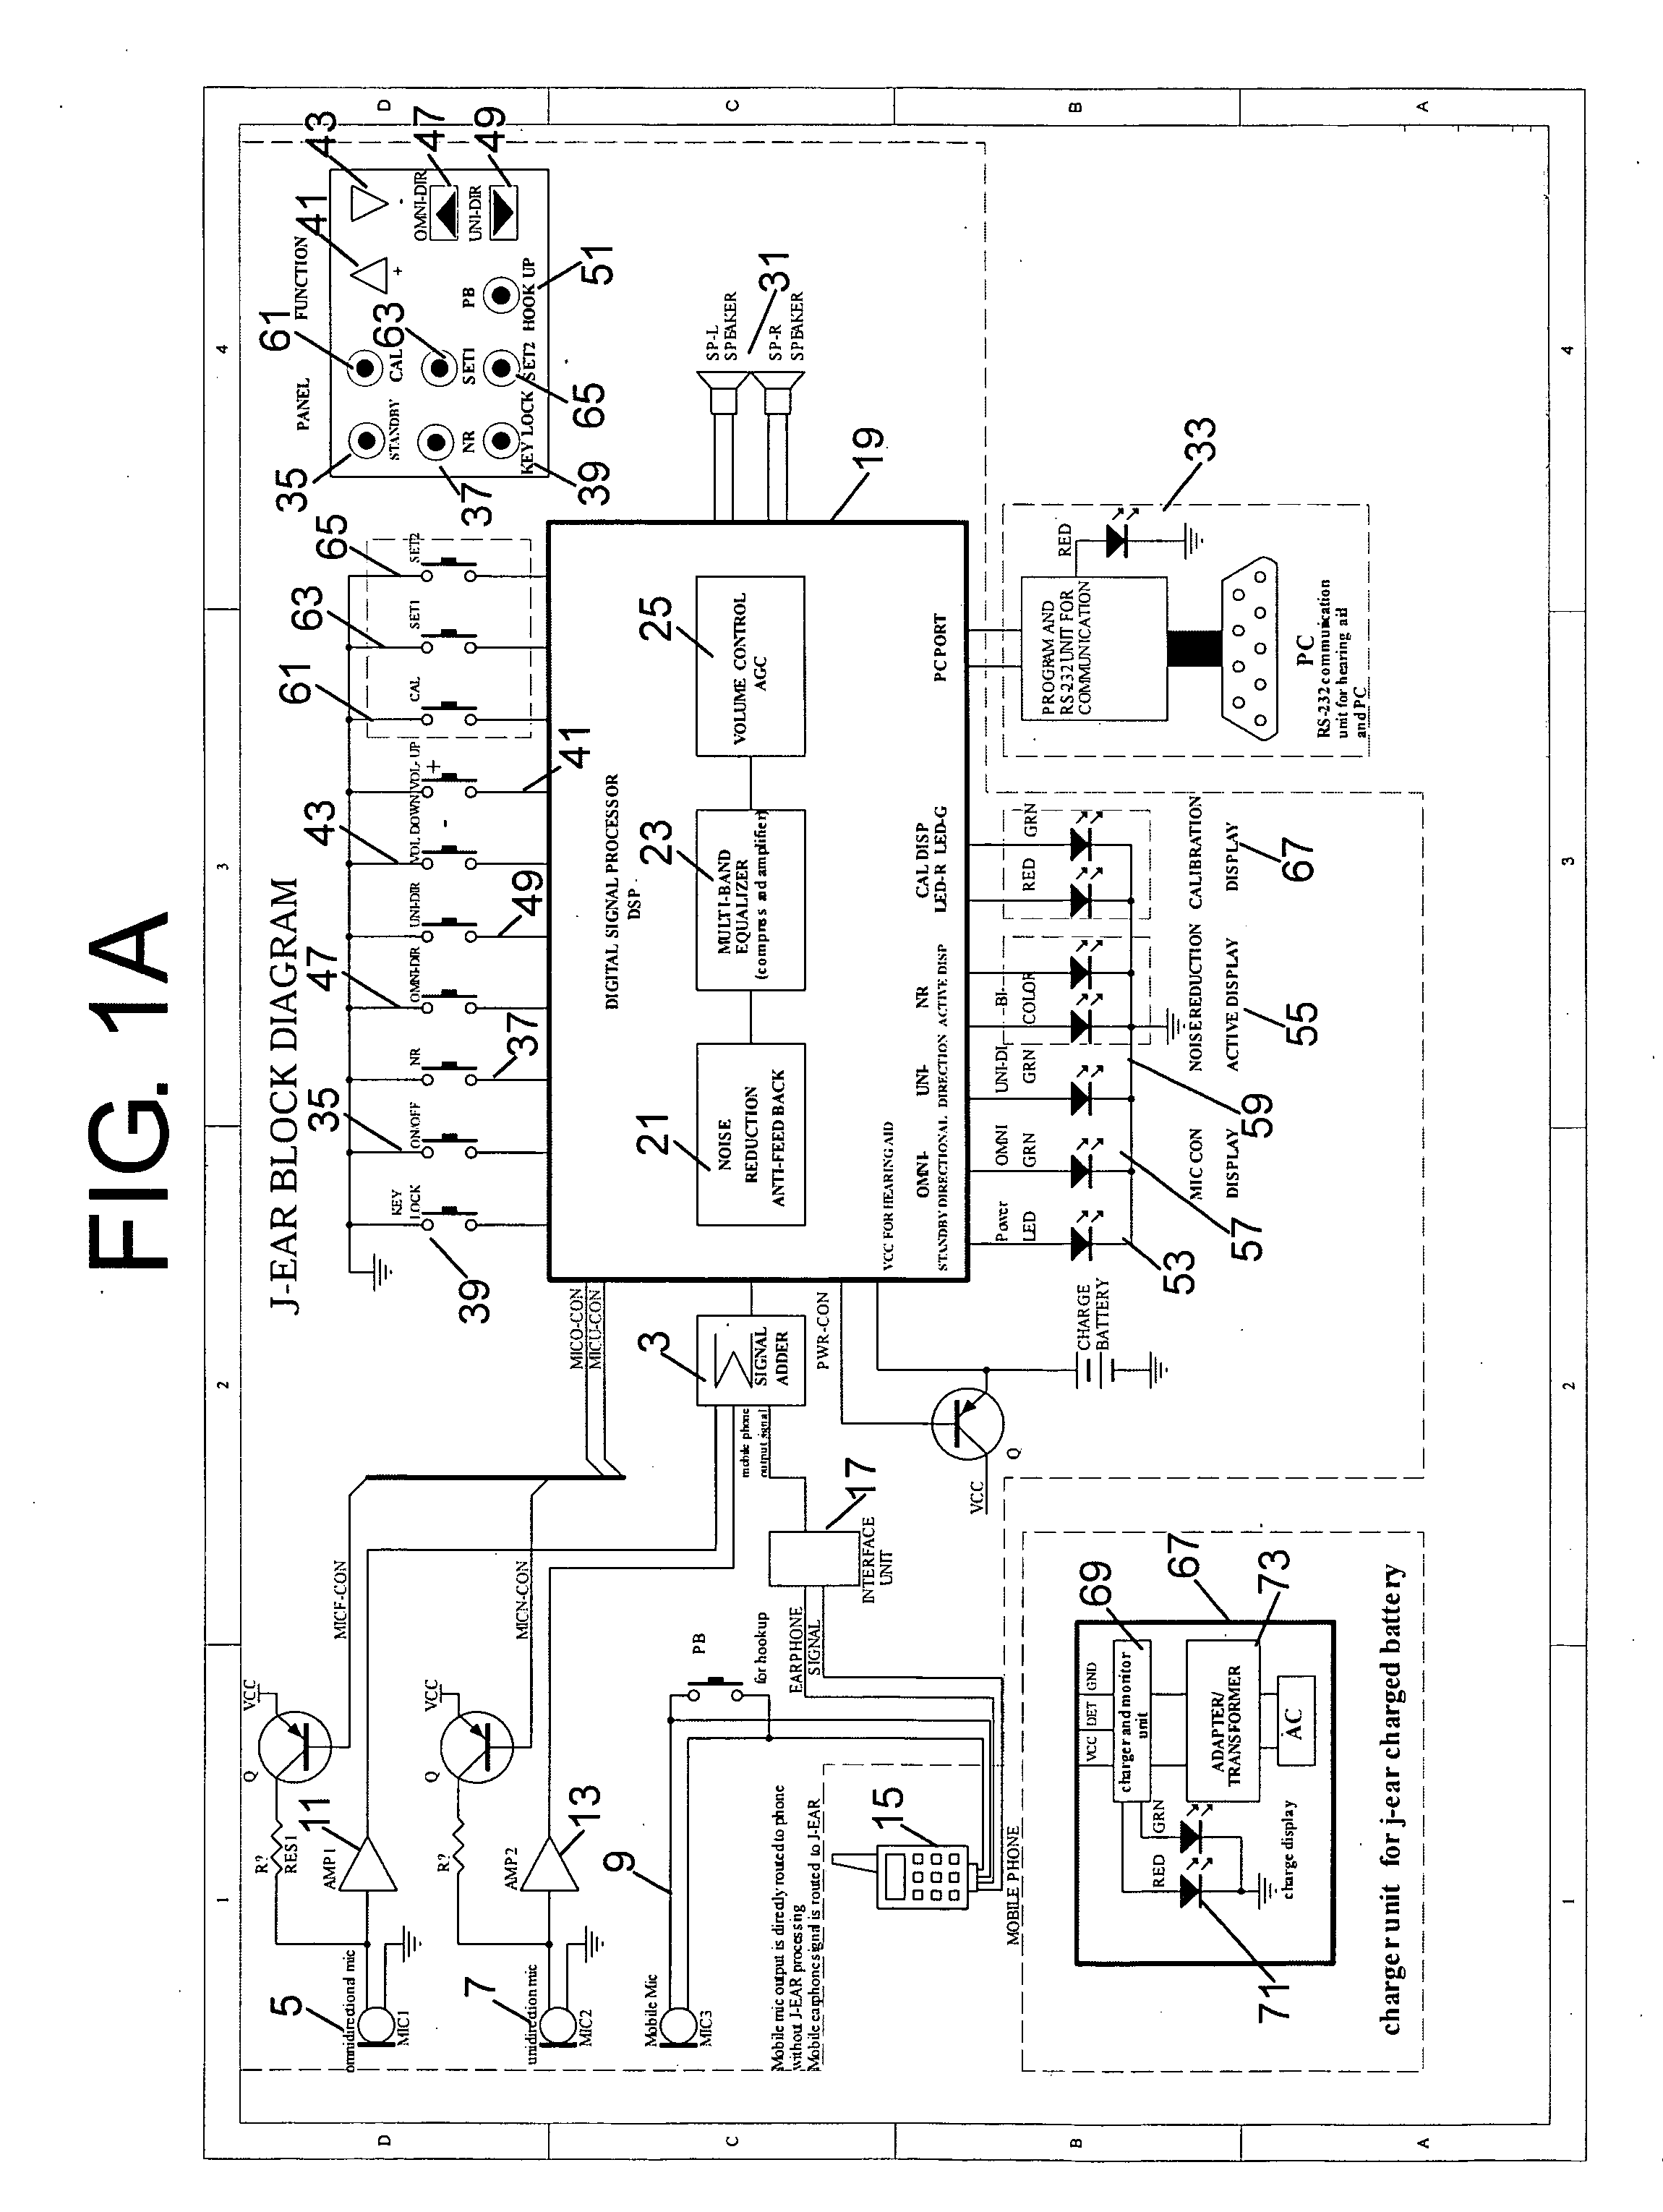 Digital noise filter system and related apparatus and methods